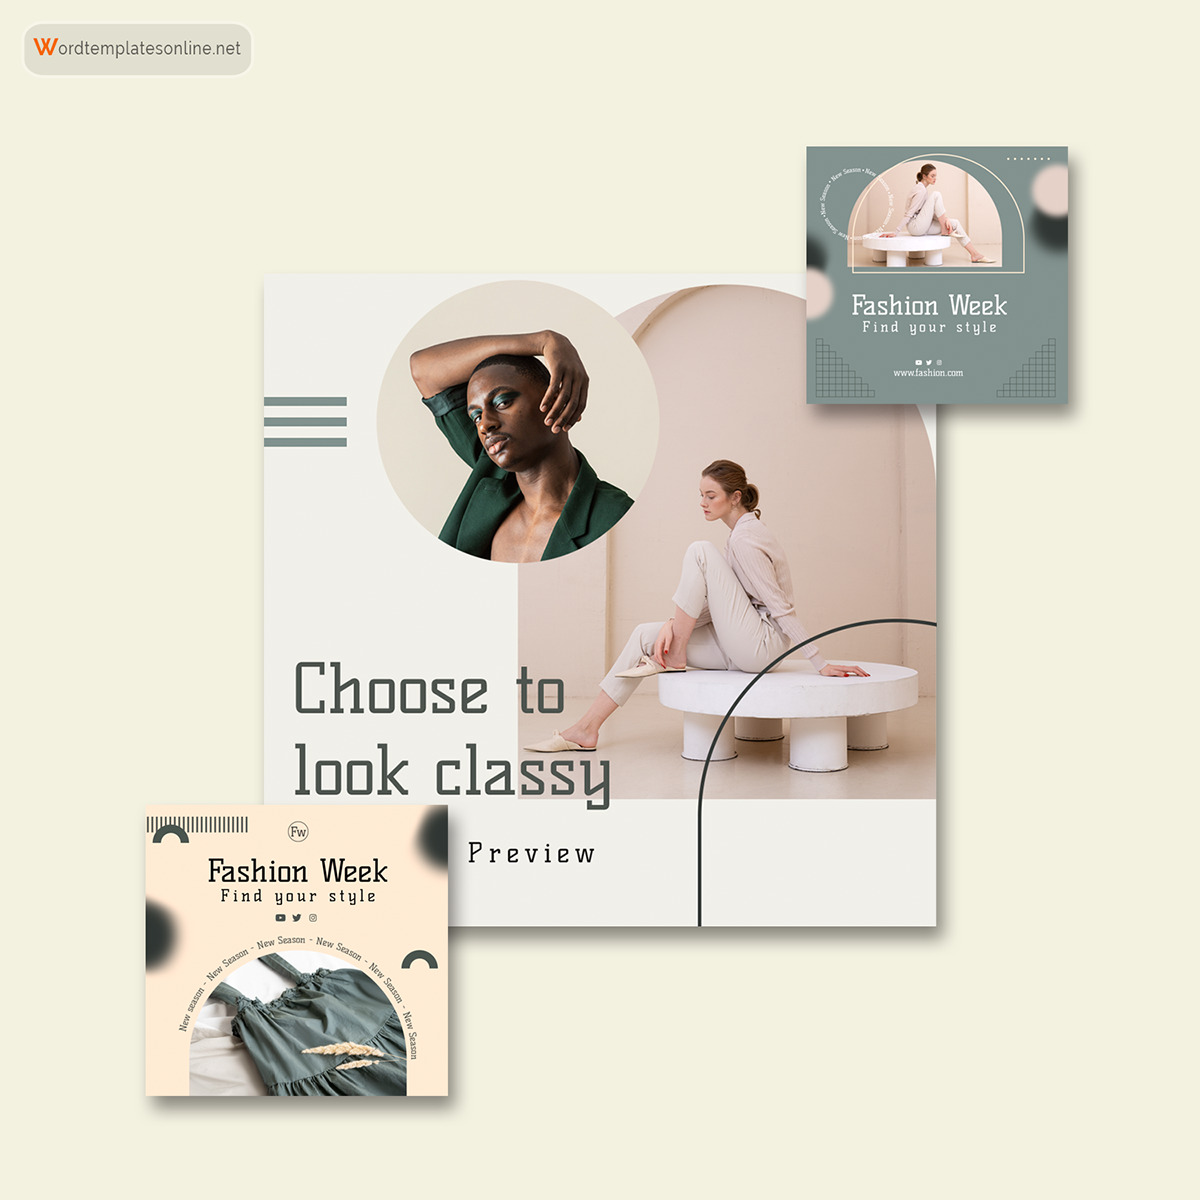 Sample Graphic Media Kit Template - Customize Your Branding